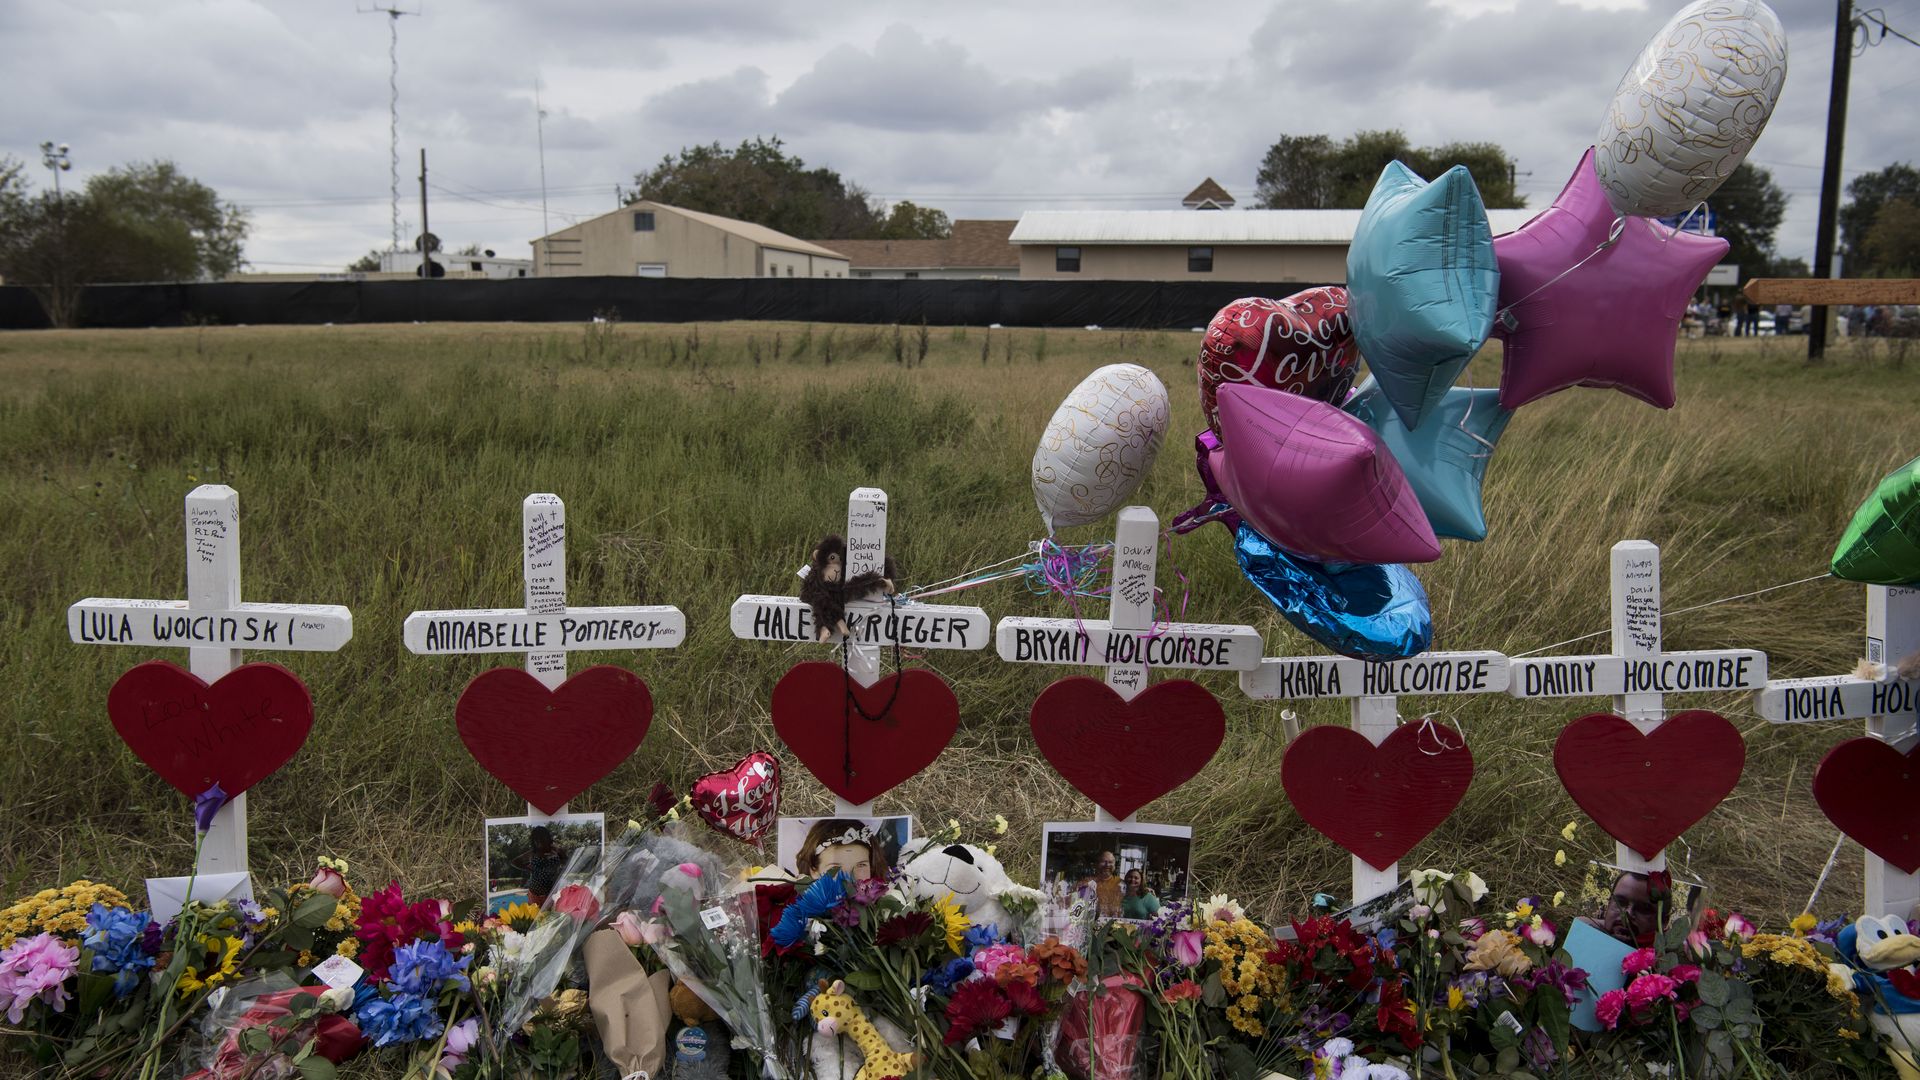 The memorial crosses for the victims of the Sutherland Springs First Baptist Church shooting.